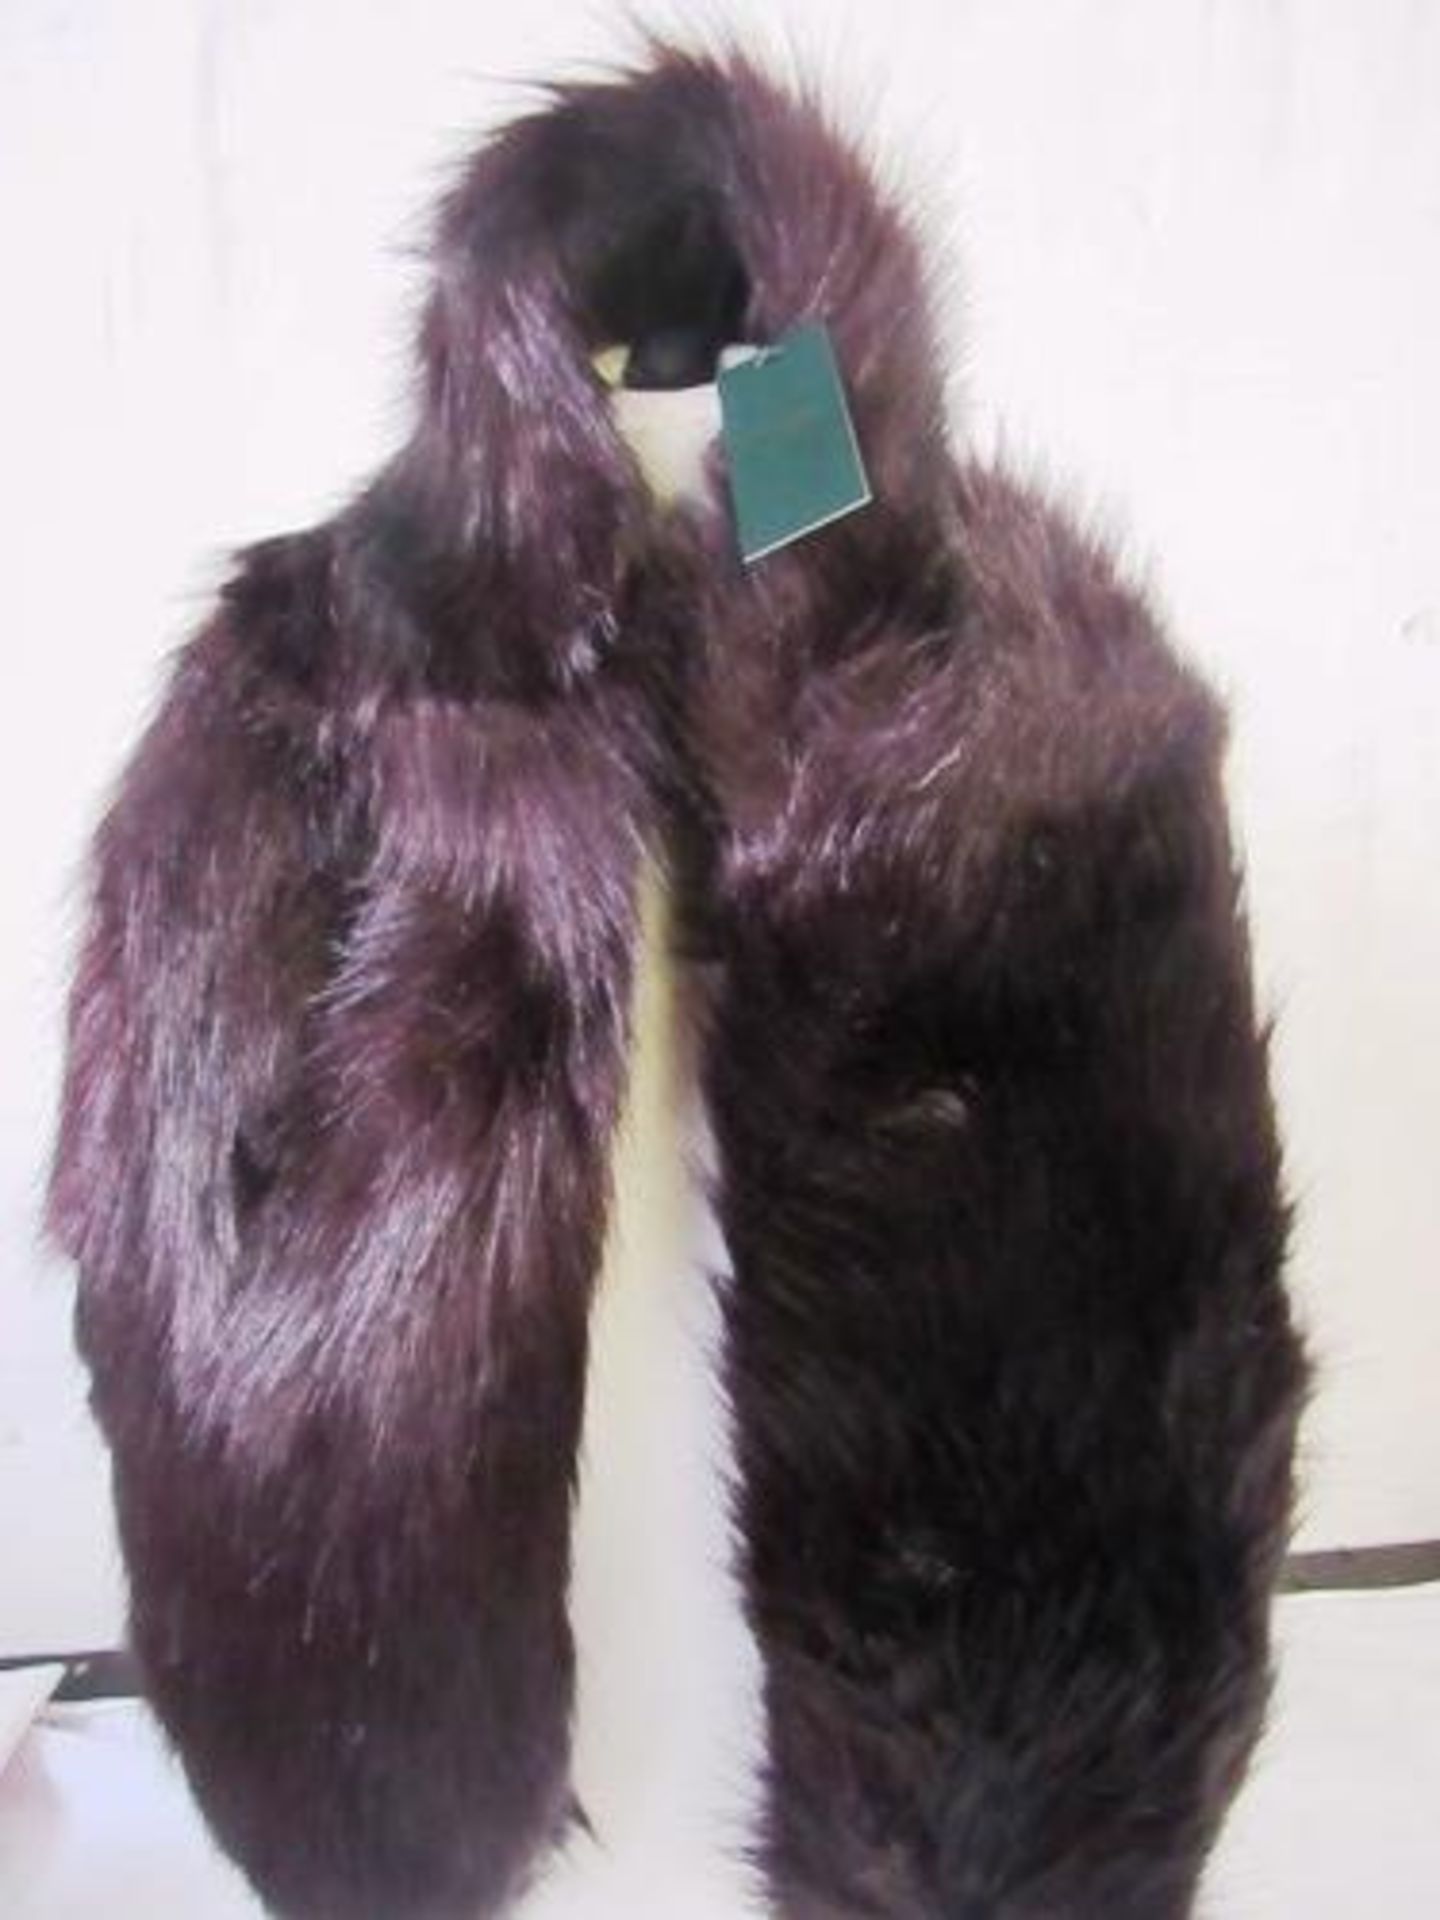 2 x Hobbs faux fur Lumi wraps, one size, colour dark berry - Sealed new in pack (ES17B)